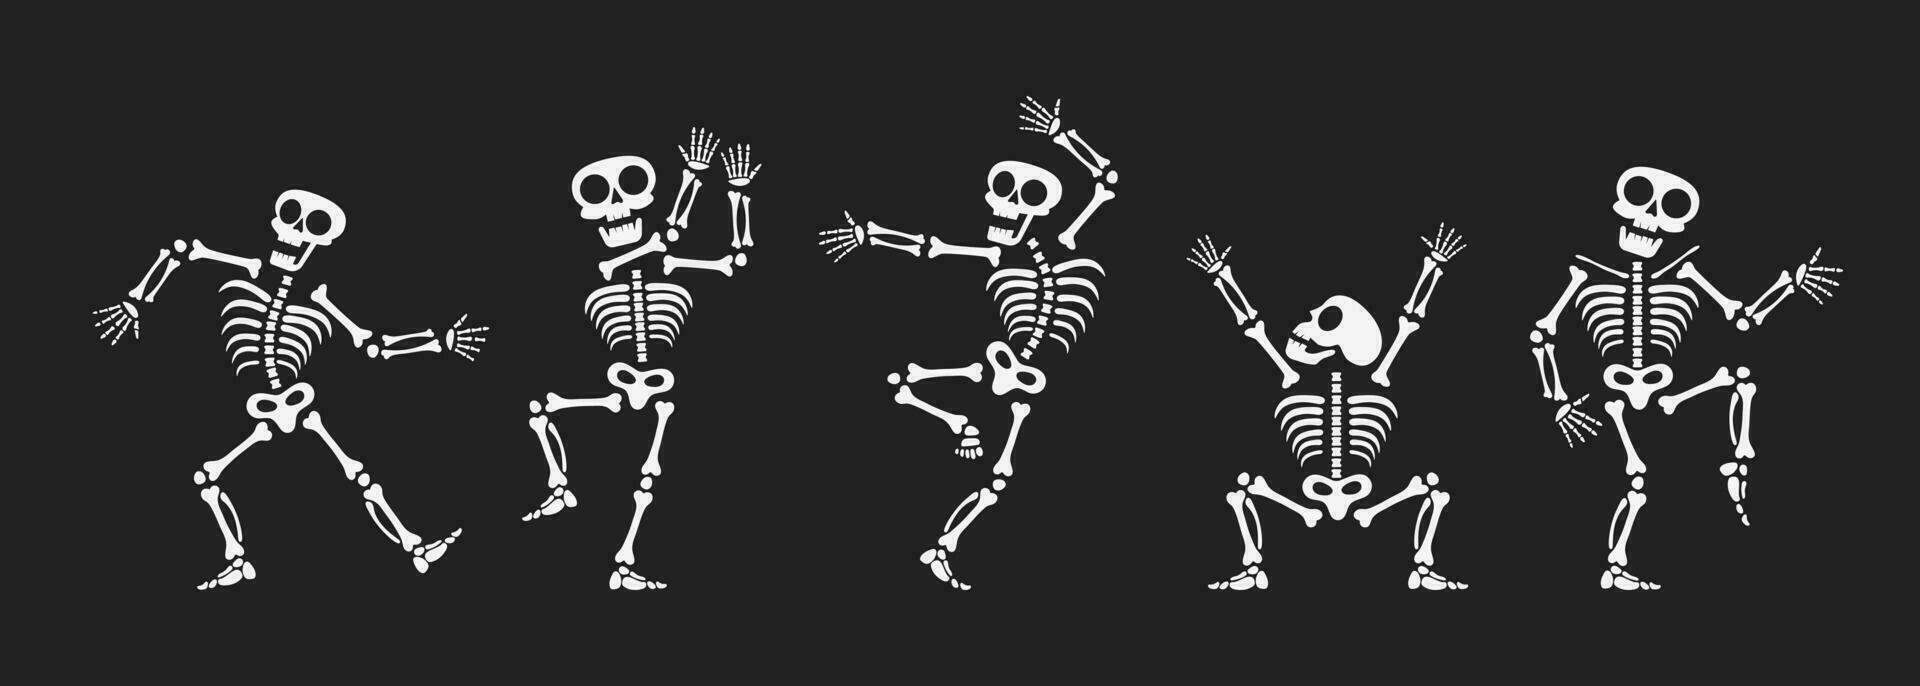 Skeletons dancing with different positions flat style design vector illustration set.